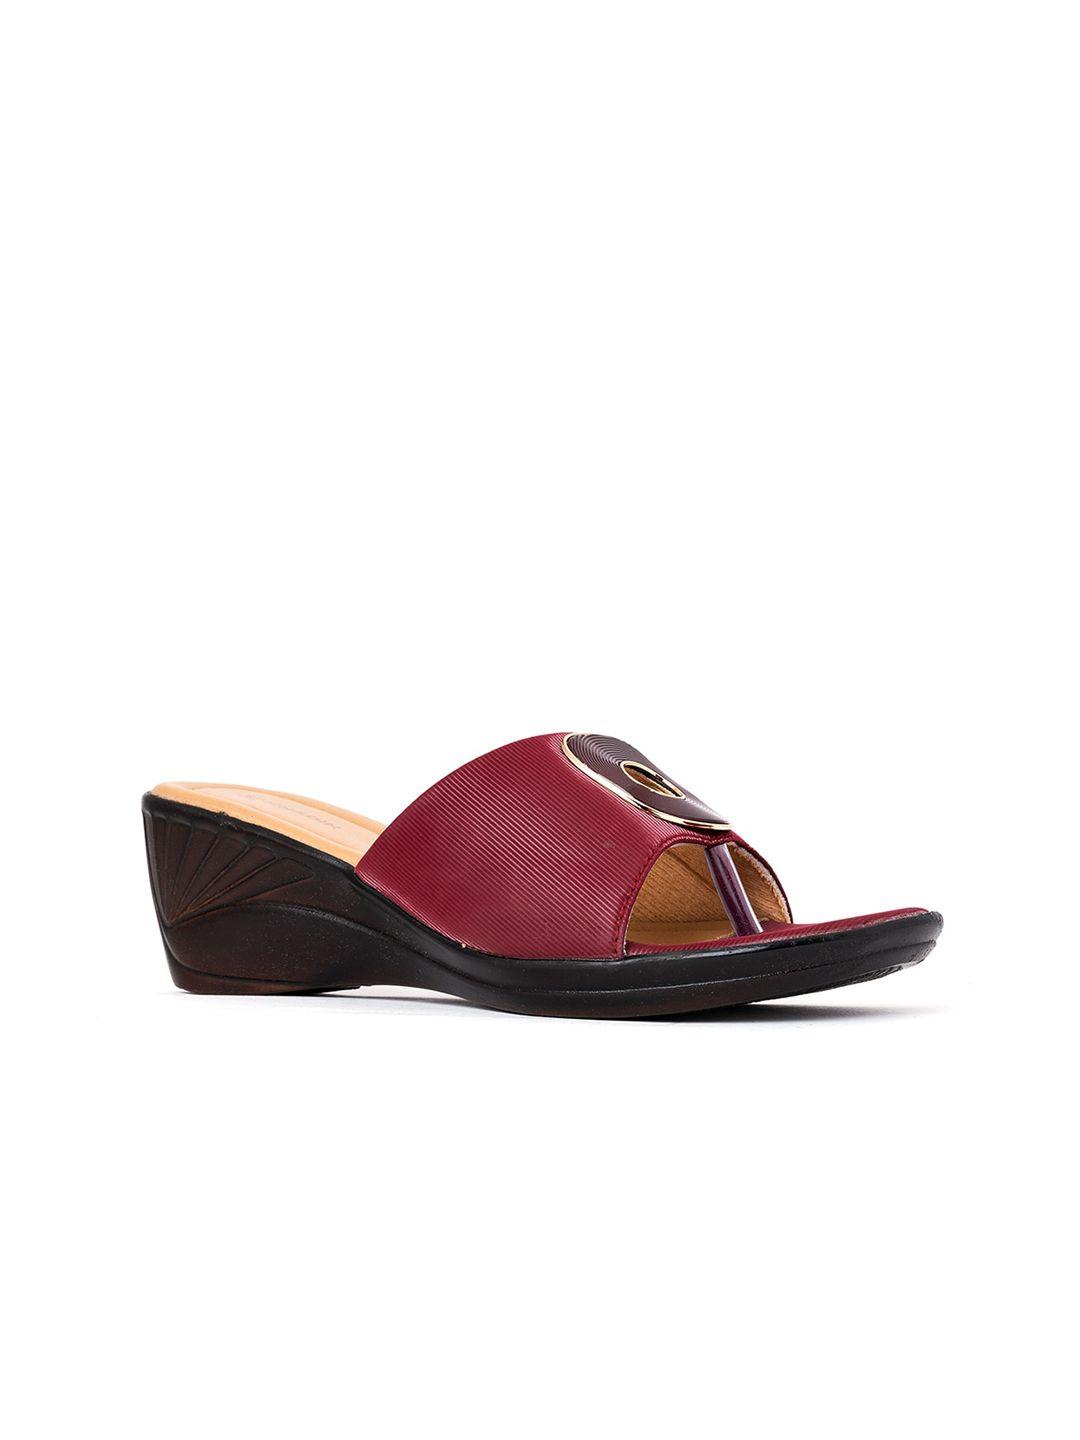 khadims maroon wedge sandals with buckles